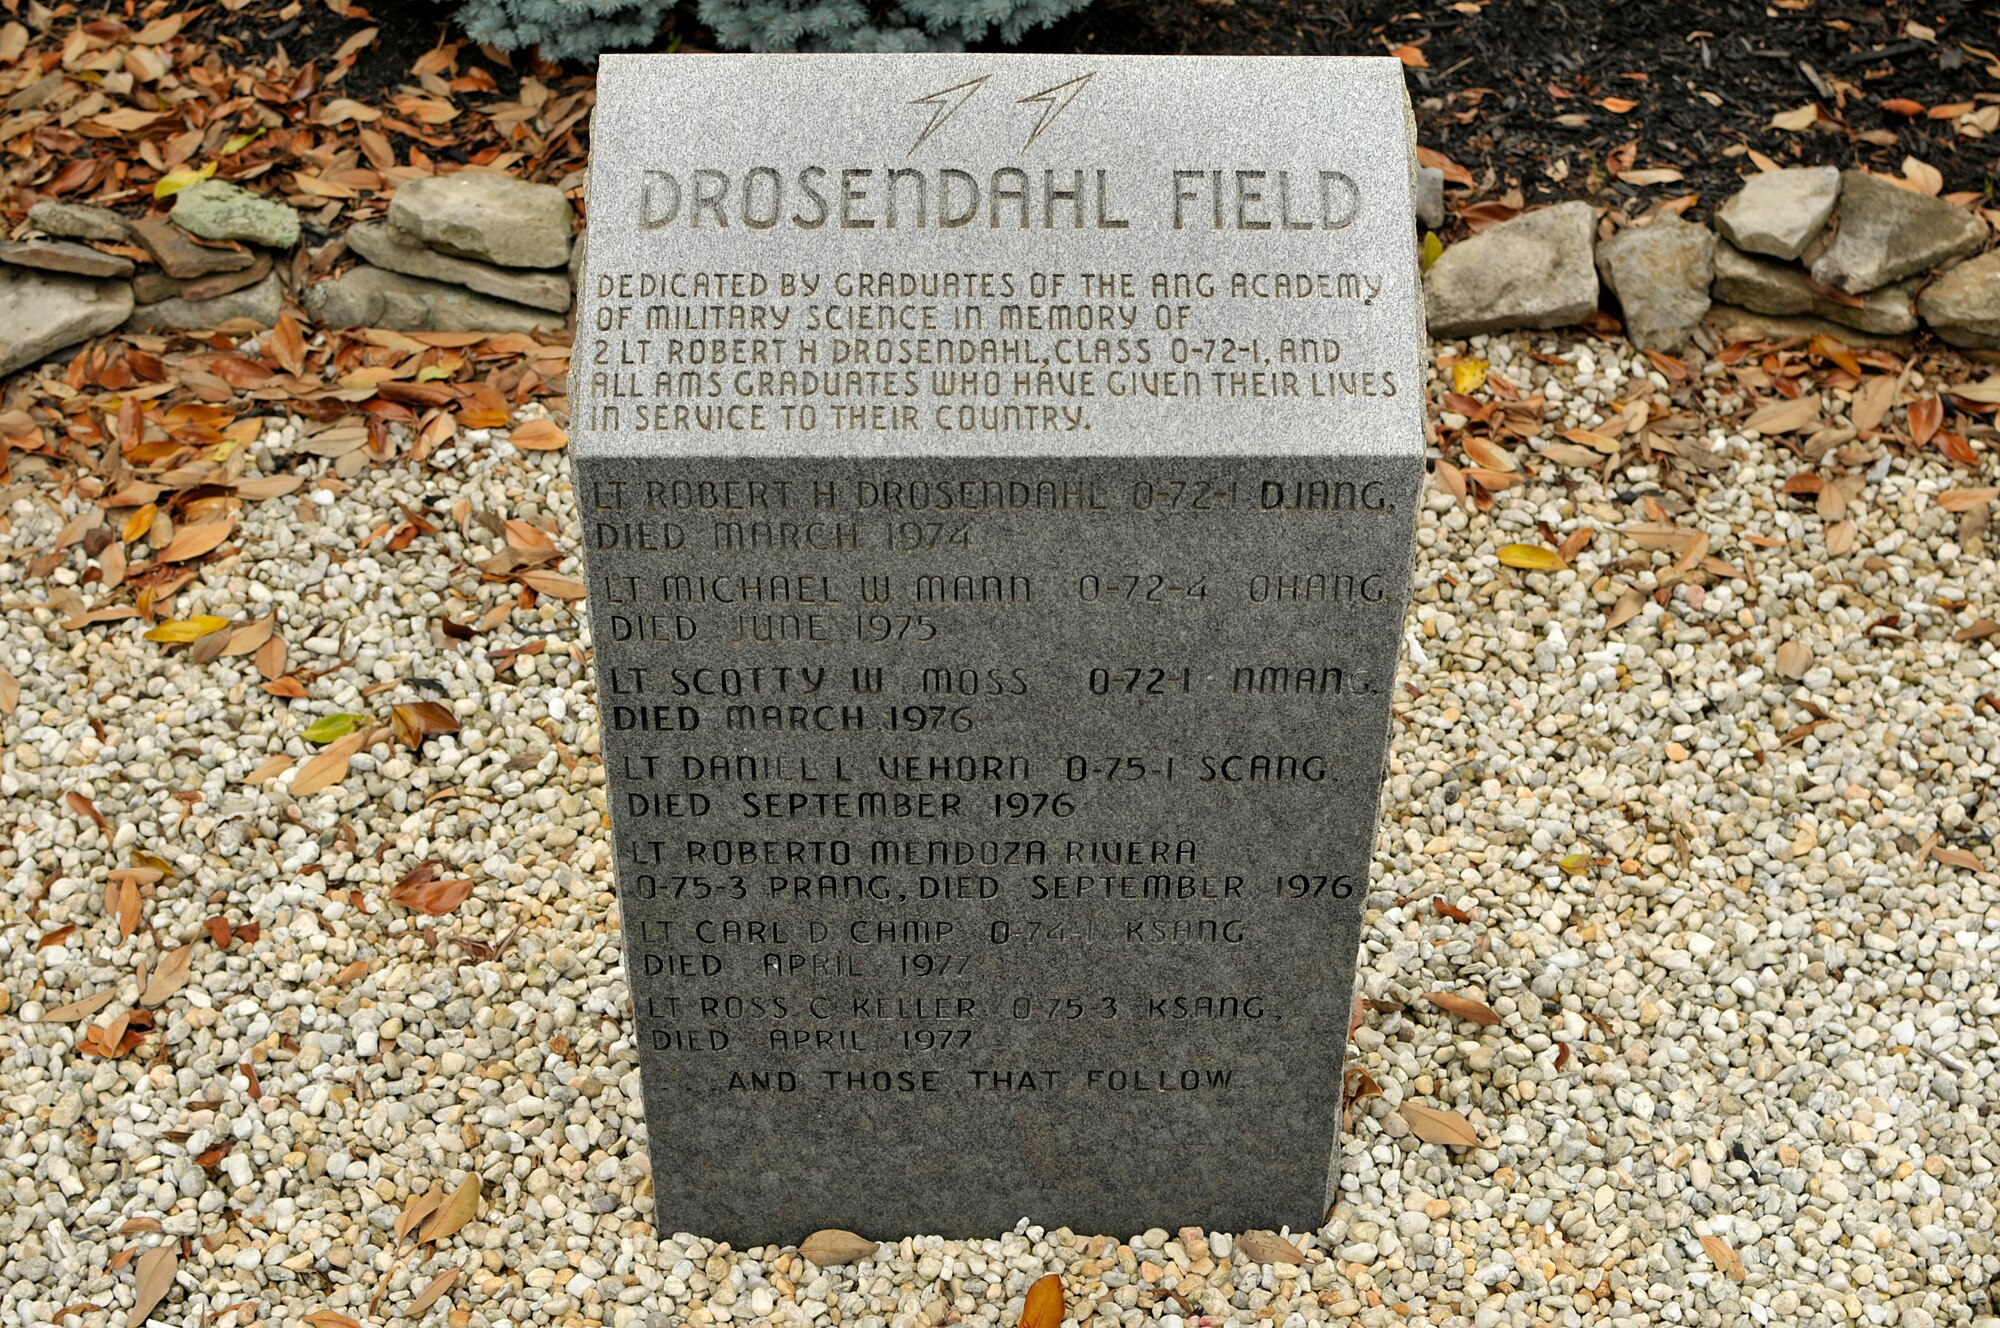 MCGHEE TYSON AIR NATIONAL GUARD BASE, Tenn. - A memorial stone, located on the edge of the parade ground at the I.G. Brown Training and Education Center here, was dedicated by graduates of the Academy of Military Science in memory of Air Force 2nd Lt. Robert H. Drosendahl, a 1972 AMS graduate and a New Jersey Air National Guard officer.  Other TEC students included National Guard officers from Ohio, New Mexico, South Carolina, and Kansas who died in service to the nation. (U.S. Air National Guard photo by Master Sgt. Mike R. Smith/Released)